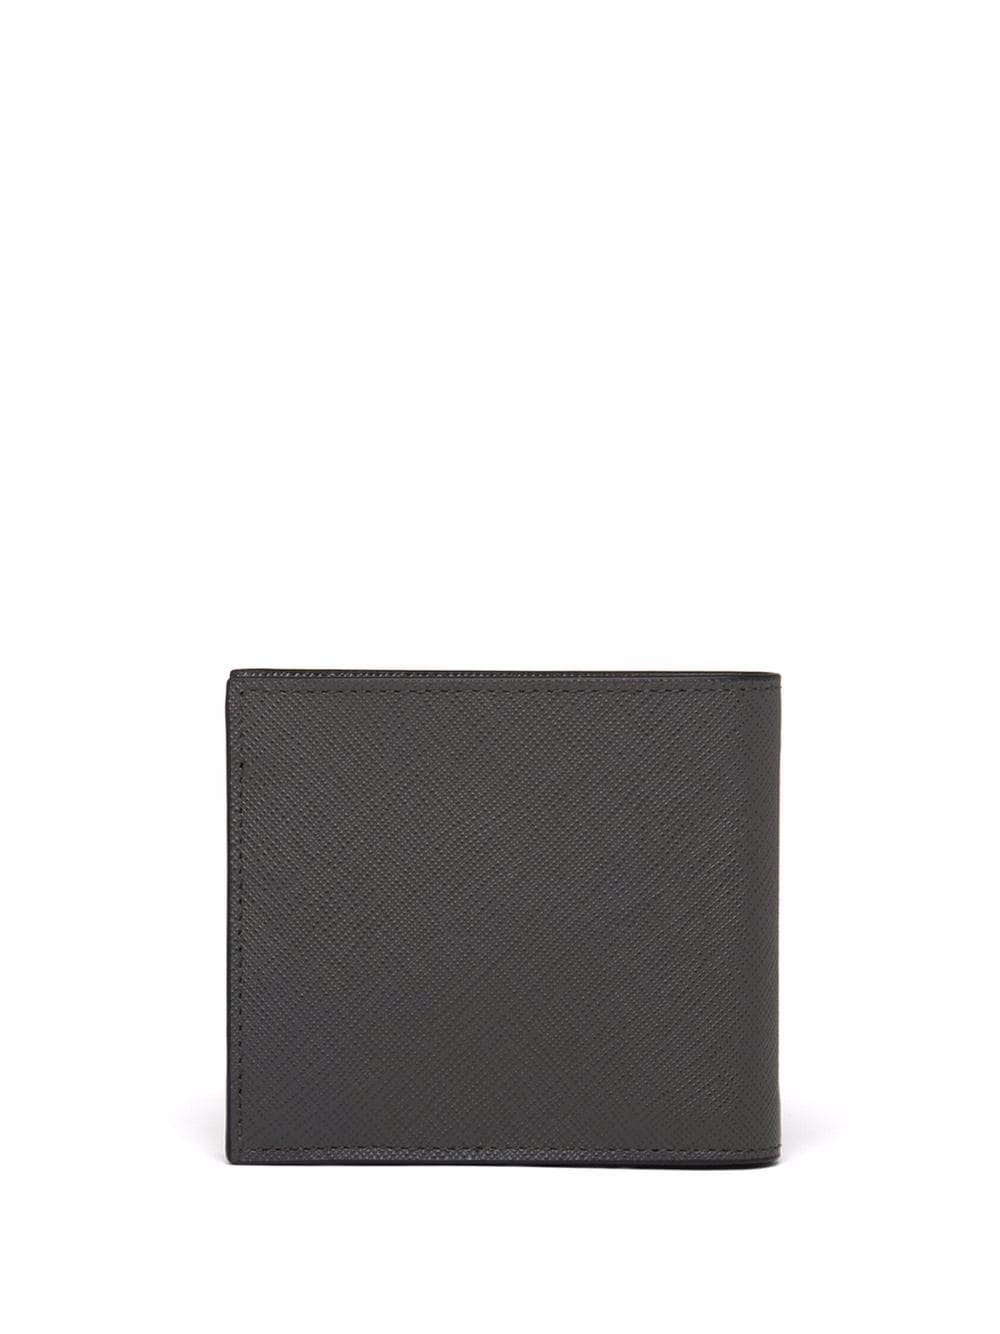 Saffiano leather wallet - 2